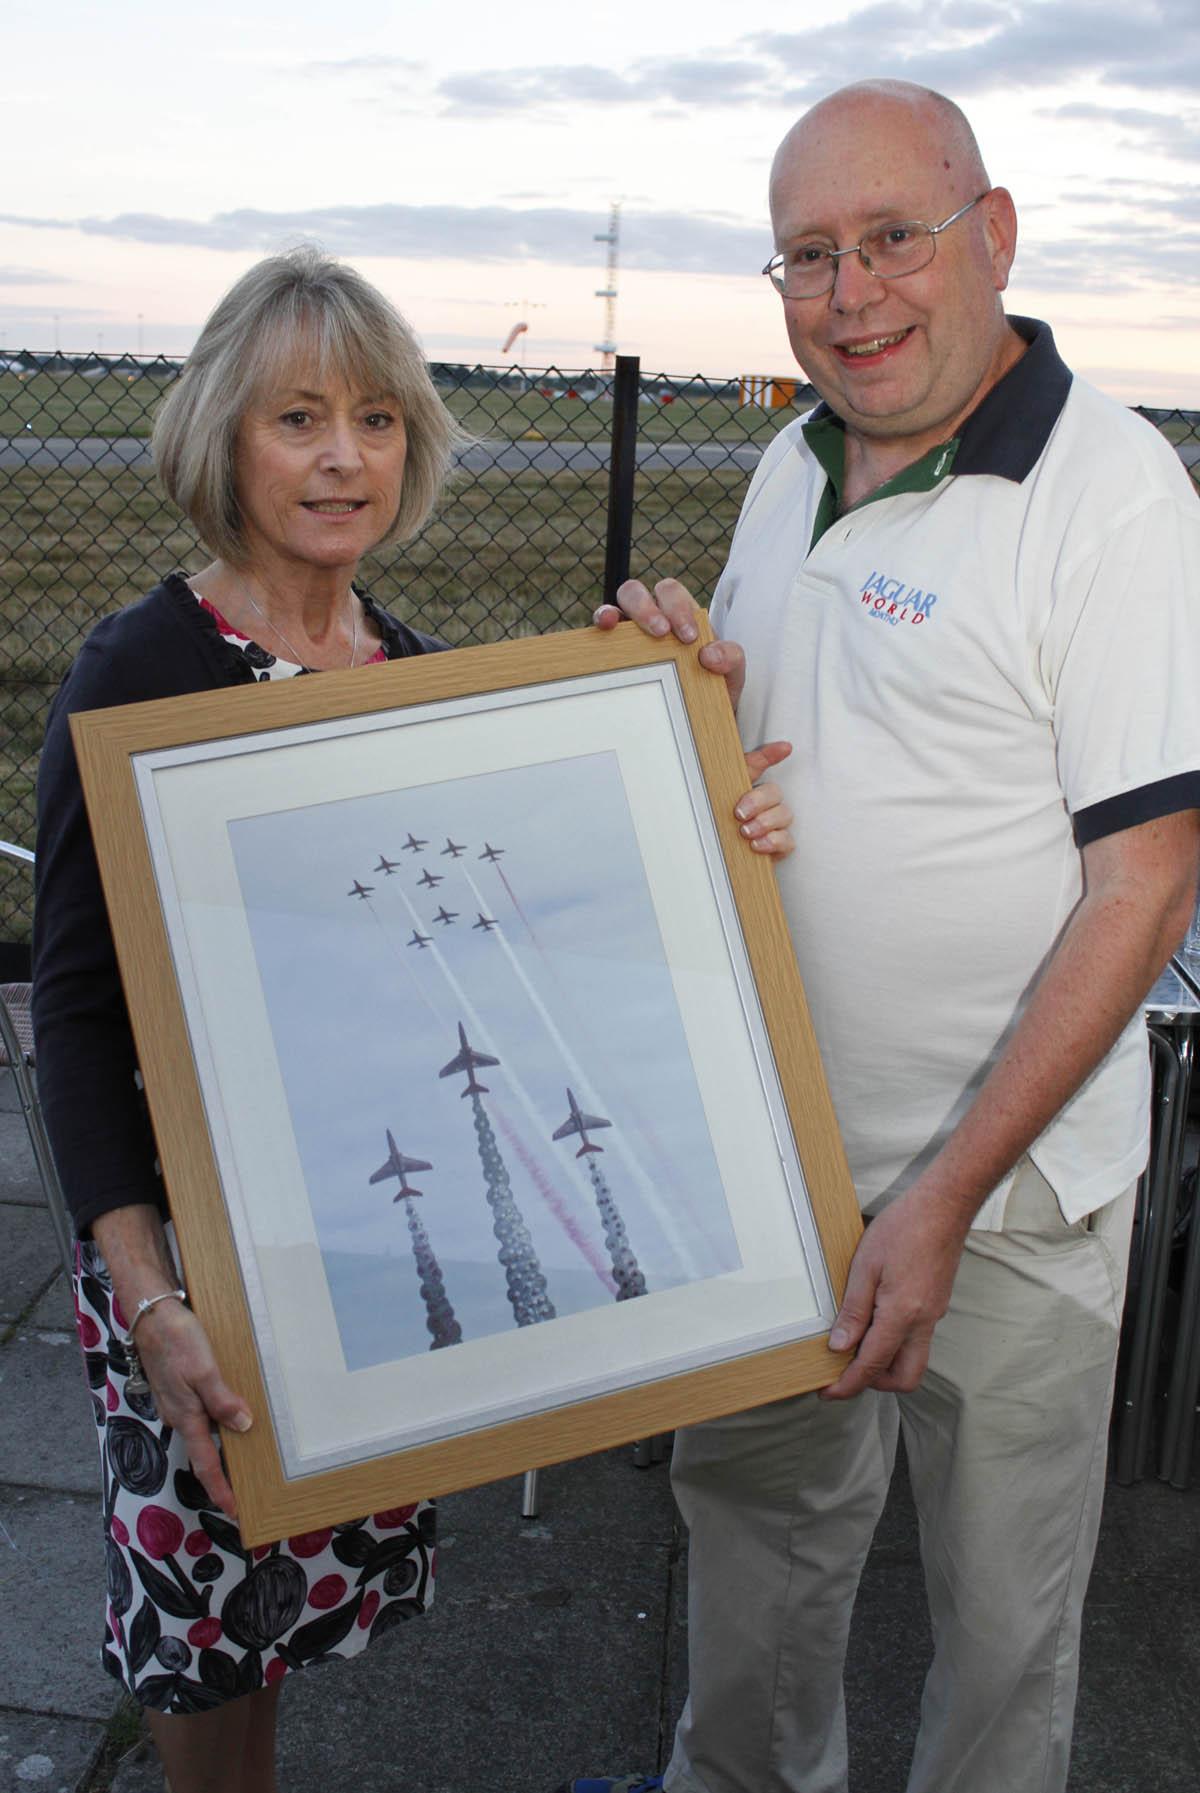 Bournemouth Red Arrows Association Barbecue at Bournemouth Flying Club ...  Stuart James with his photograph of the Red Arrows memorial with today's display in the background, and Dawn Egging from the Jon Egging Trust.